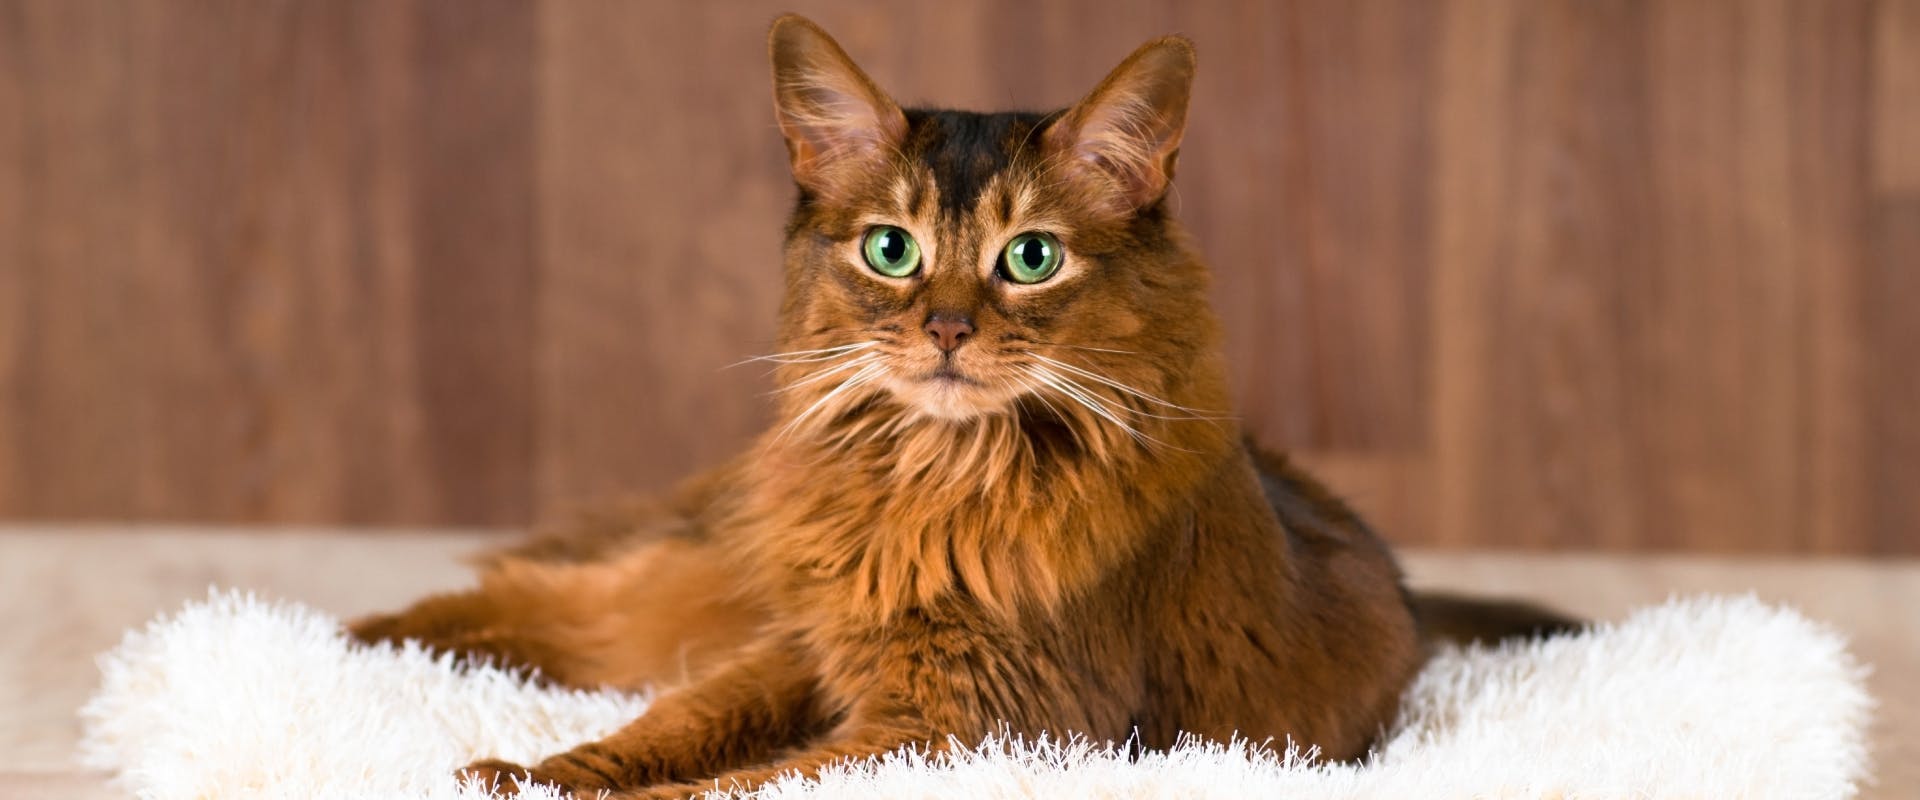 a Havana Brown Cat lying on a white rug looking directly at the camera with bright green eyes